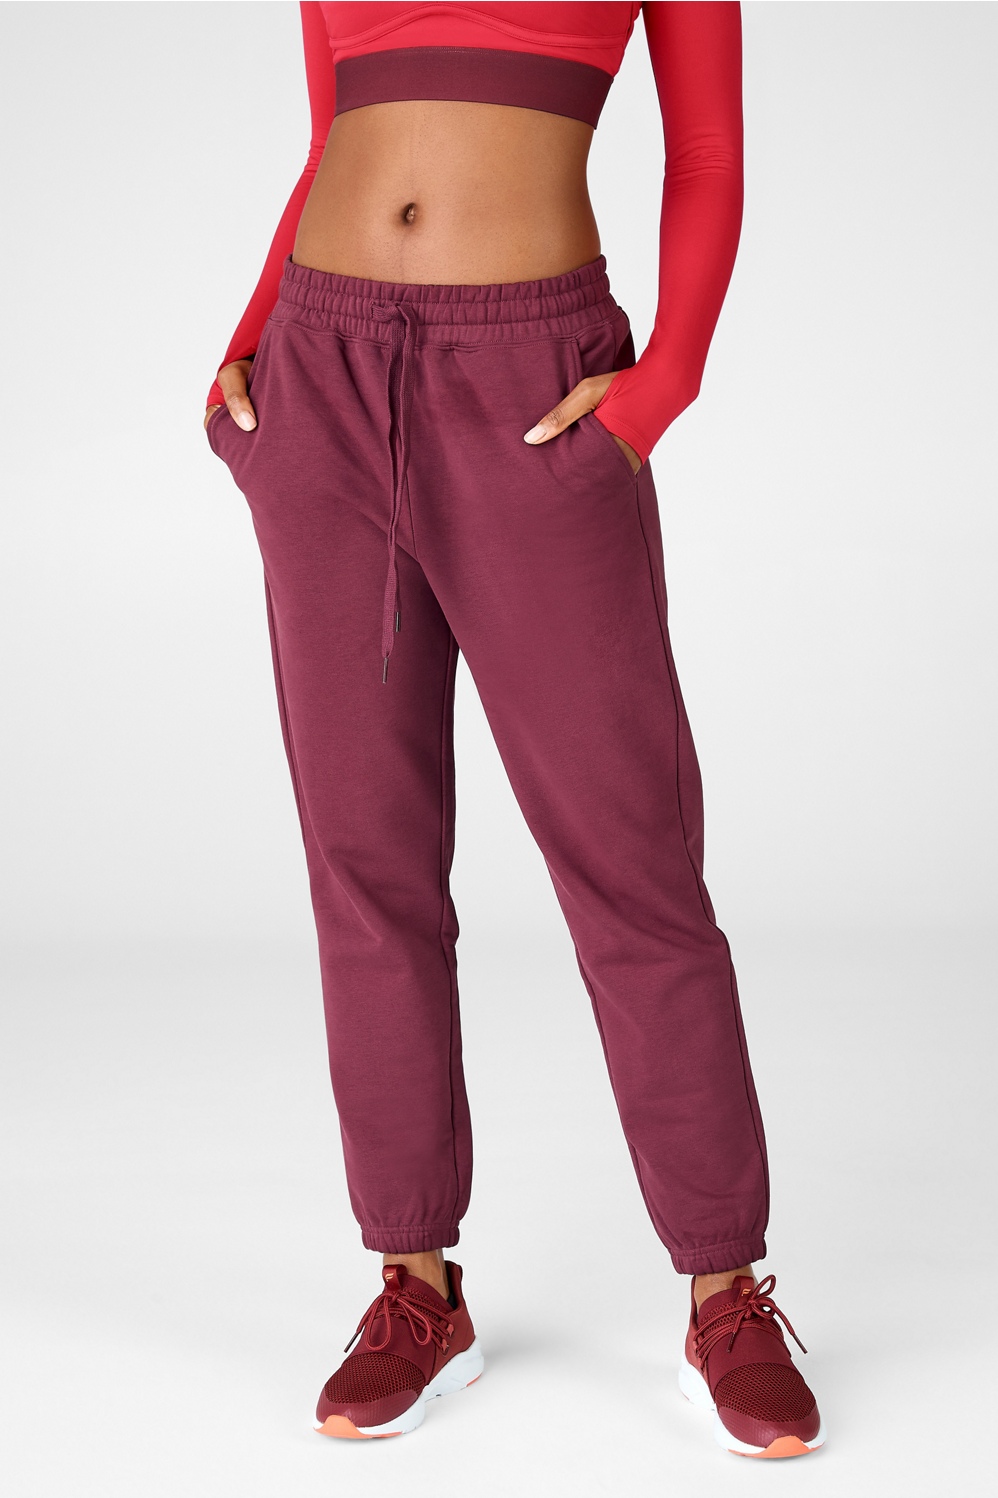 Visionary 3-Piece Outfit - Fabletics